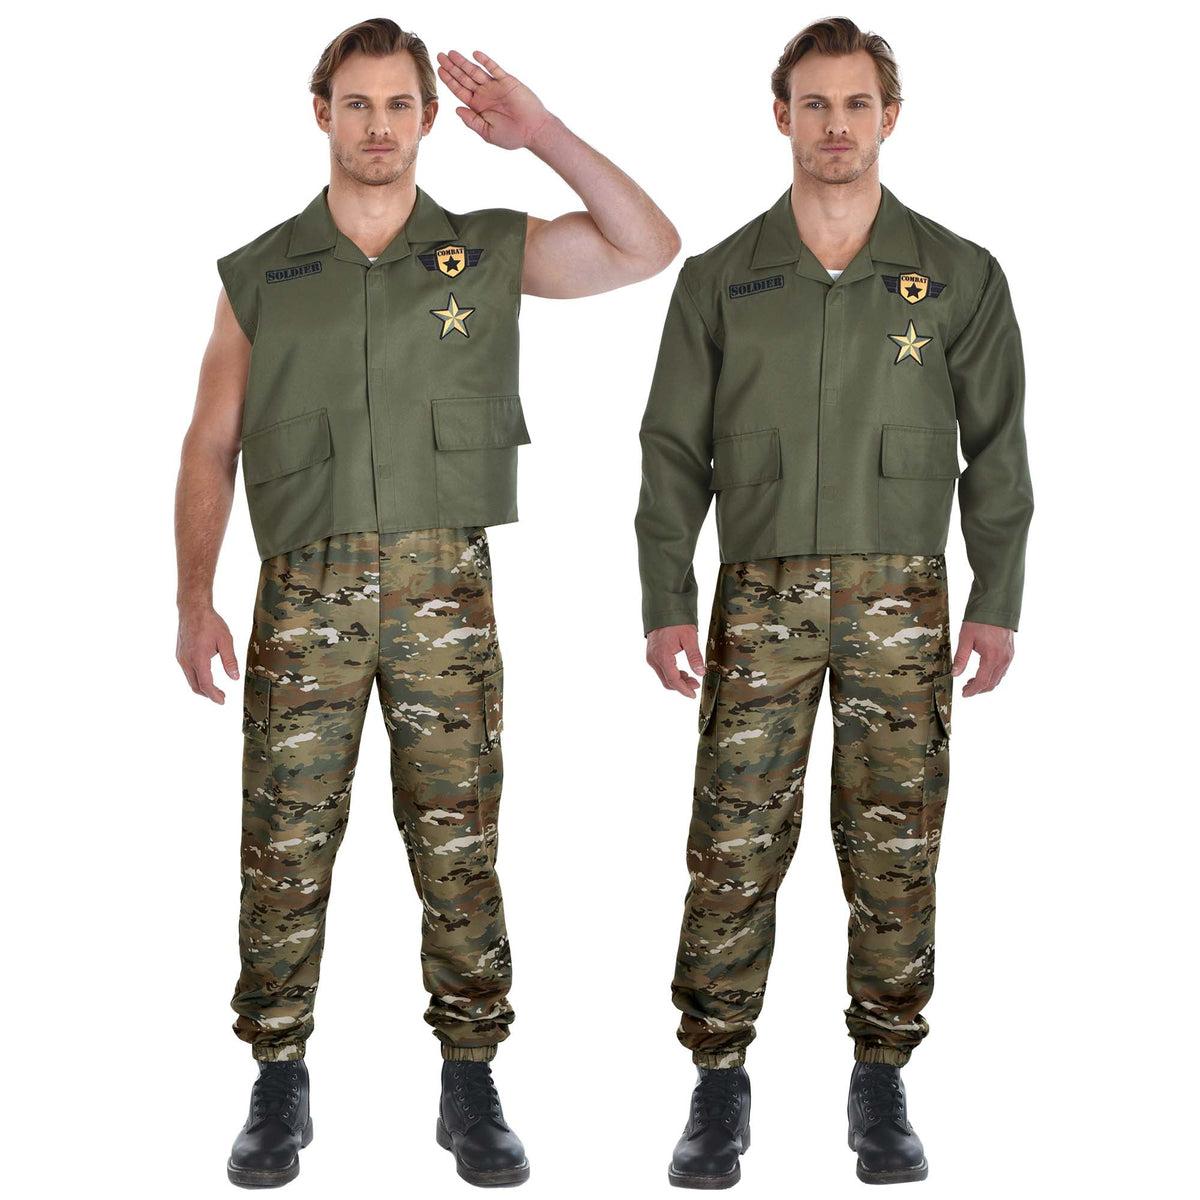 HALLOWEEN COSTUME CO. Costumes Soldier Costume for Adults, Green Jacket and pants